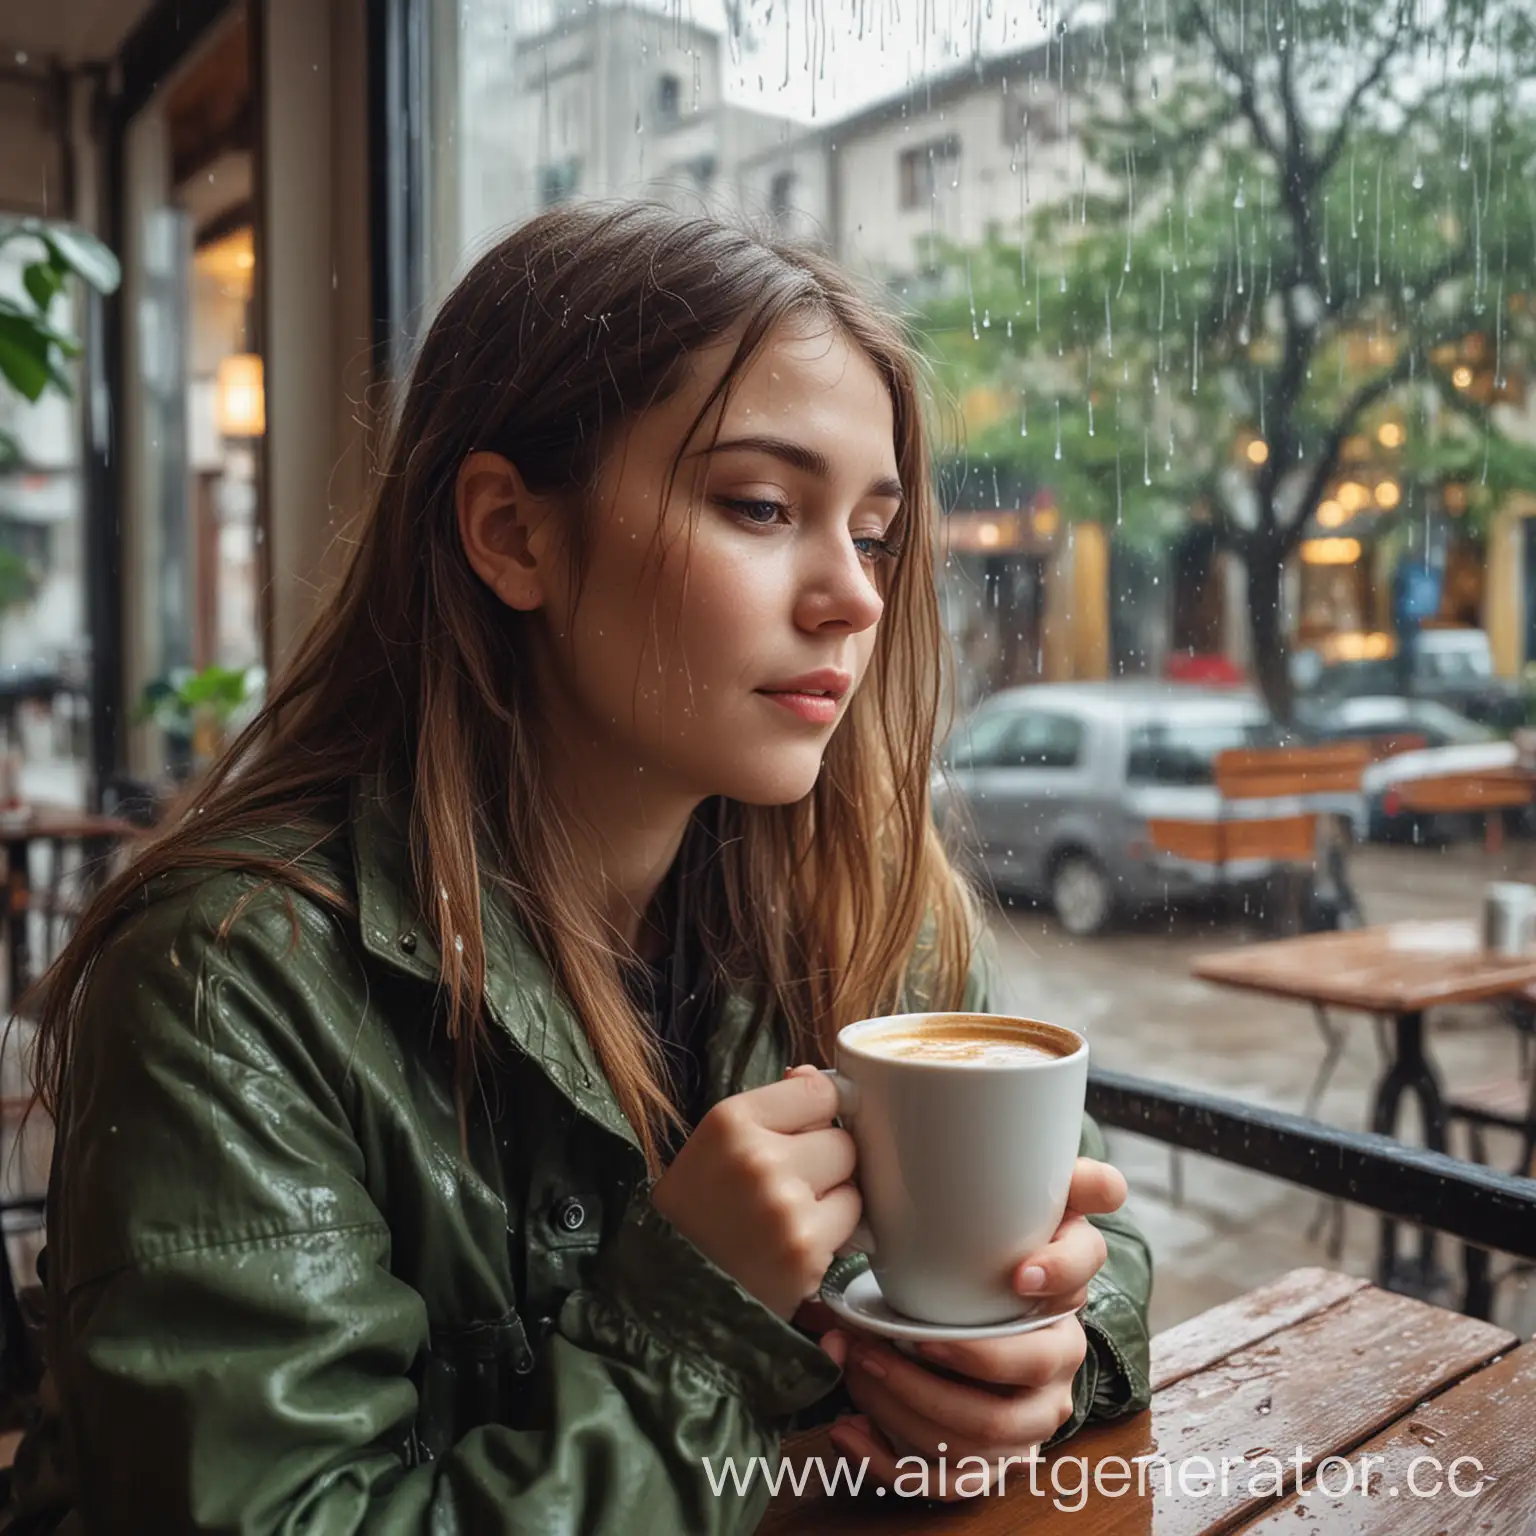 A girl looks at the first spring rain while sitting in a cafe with hot coffee.